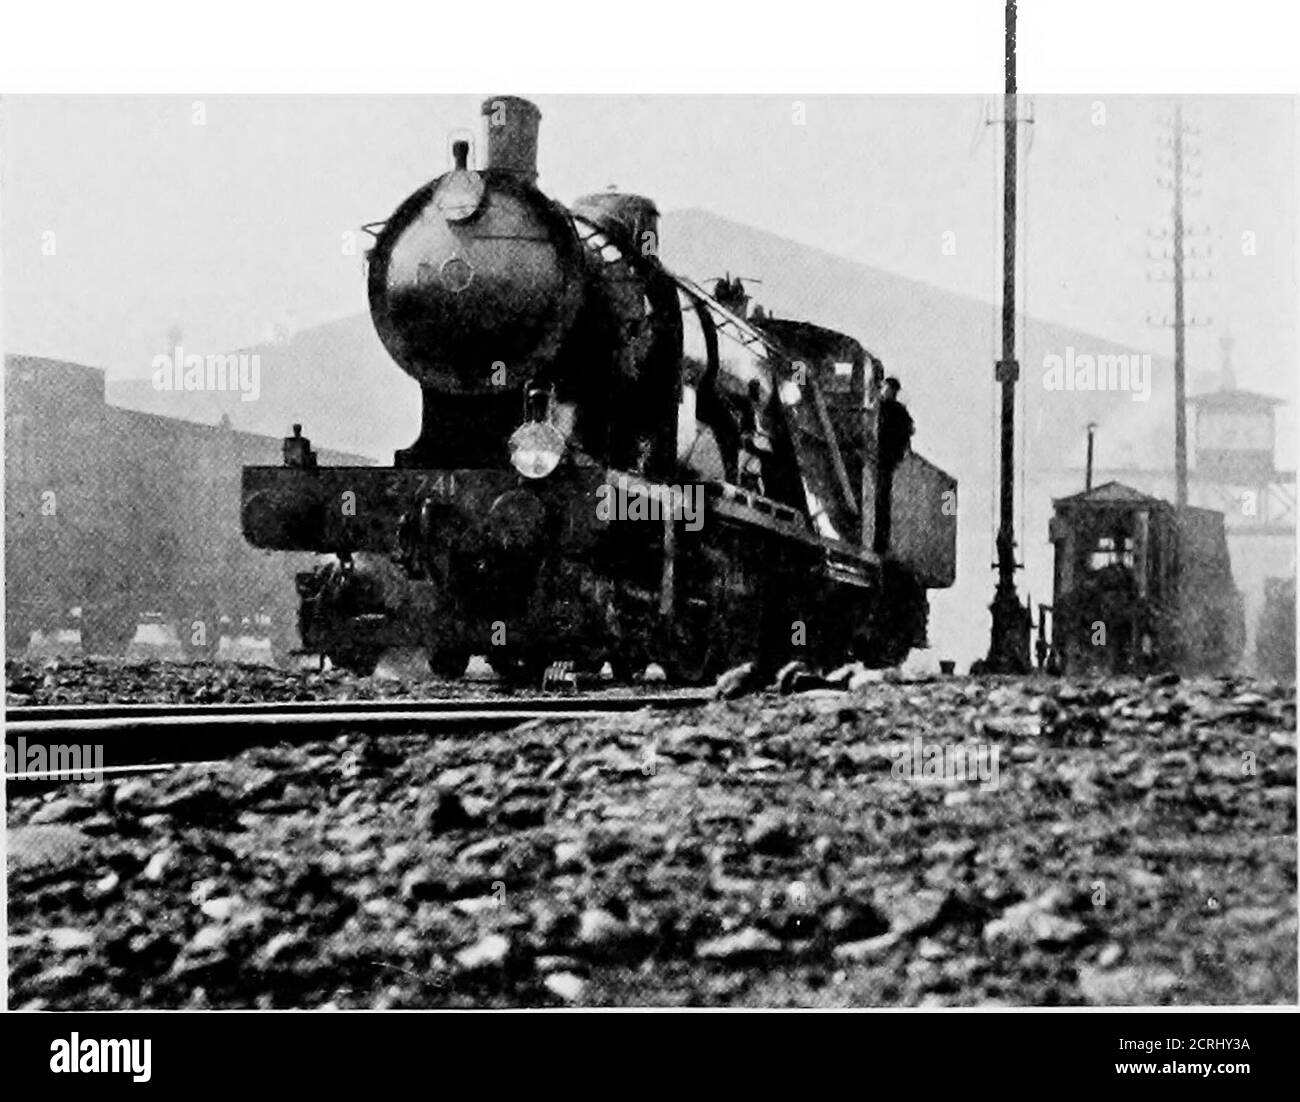 . French railways . NORD ESGINE 2.7il. is chietly remarkable for the construction of thefirebox, which is composed of a series of watertubes of small diameter, to which the water isconducted through large circulating pipes. Ad-vantage being taken of the great strength of thewater tubes, the steam pressure has been in-creased to 25() lb. per square inch. Except that FRENCH RAILWAYS 63 the trailing end of the engine is carried on a bogieinstead of one pair of small wheels, the generalarrangement is the same as with the 4-4-2engines.. NOED ENGINE 2.741 (ANOTHER VIEW). As with the passenger engine Stock Photo